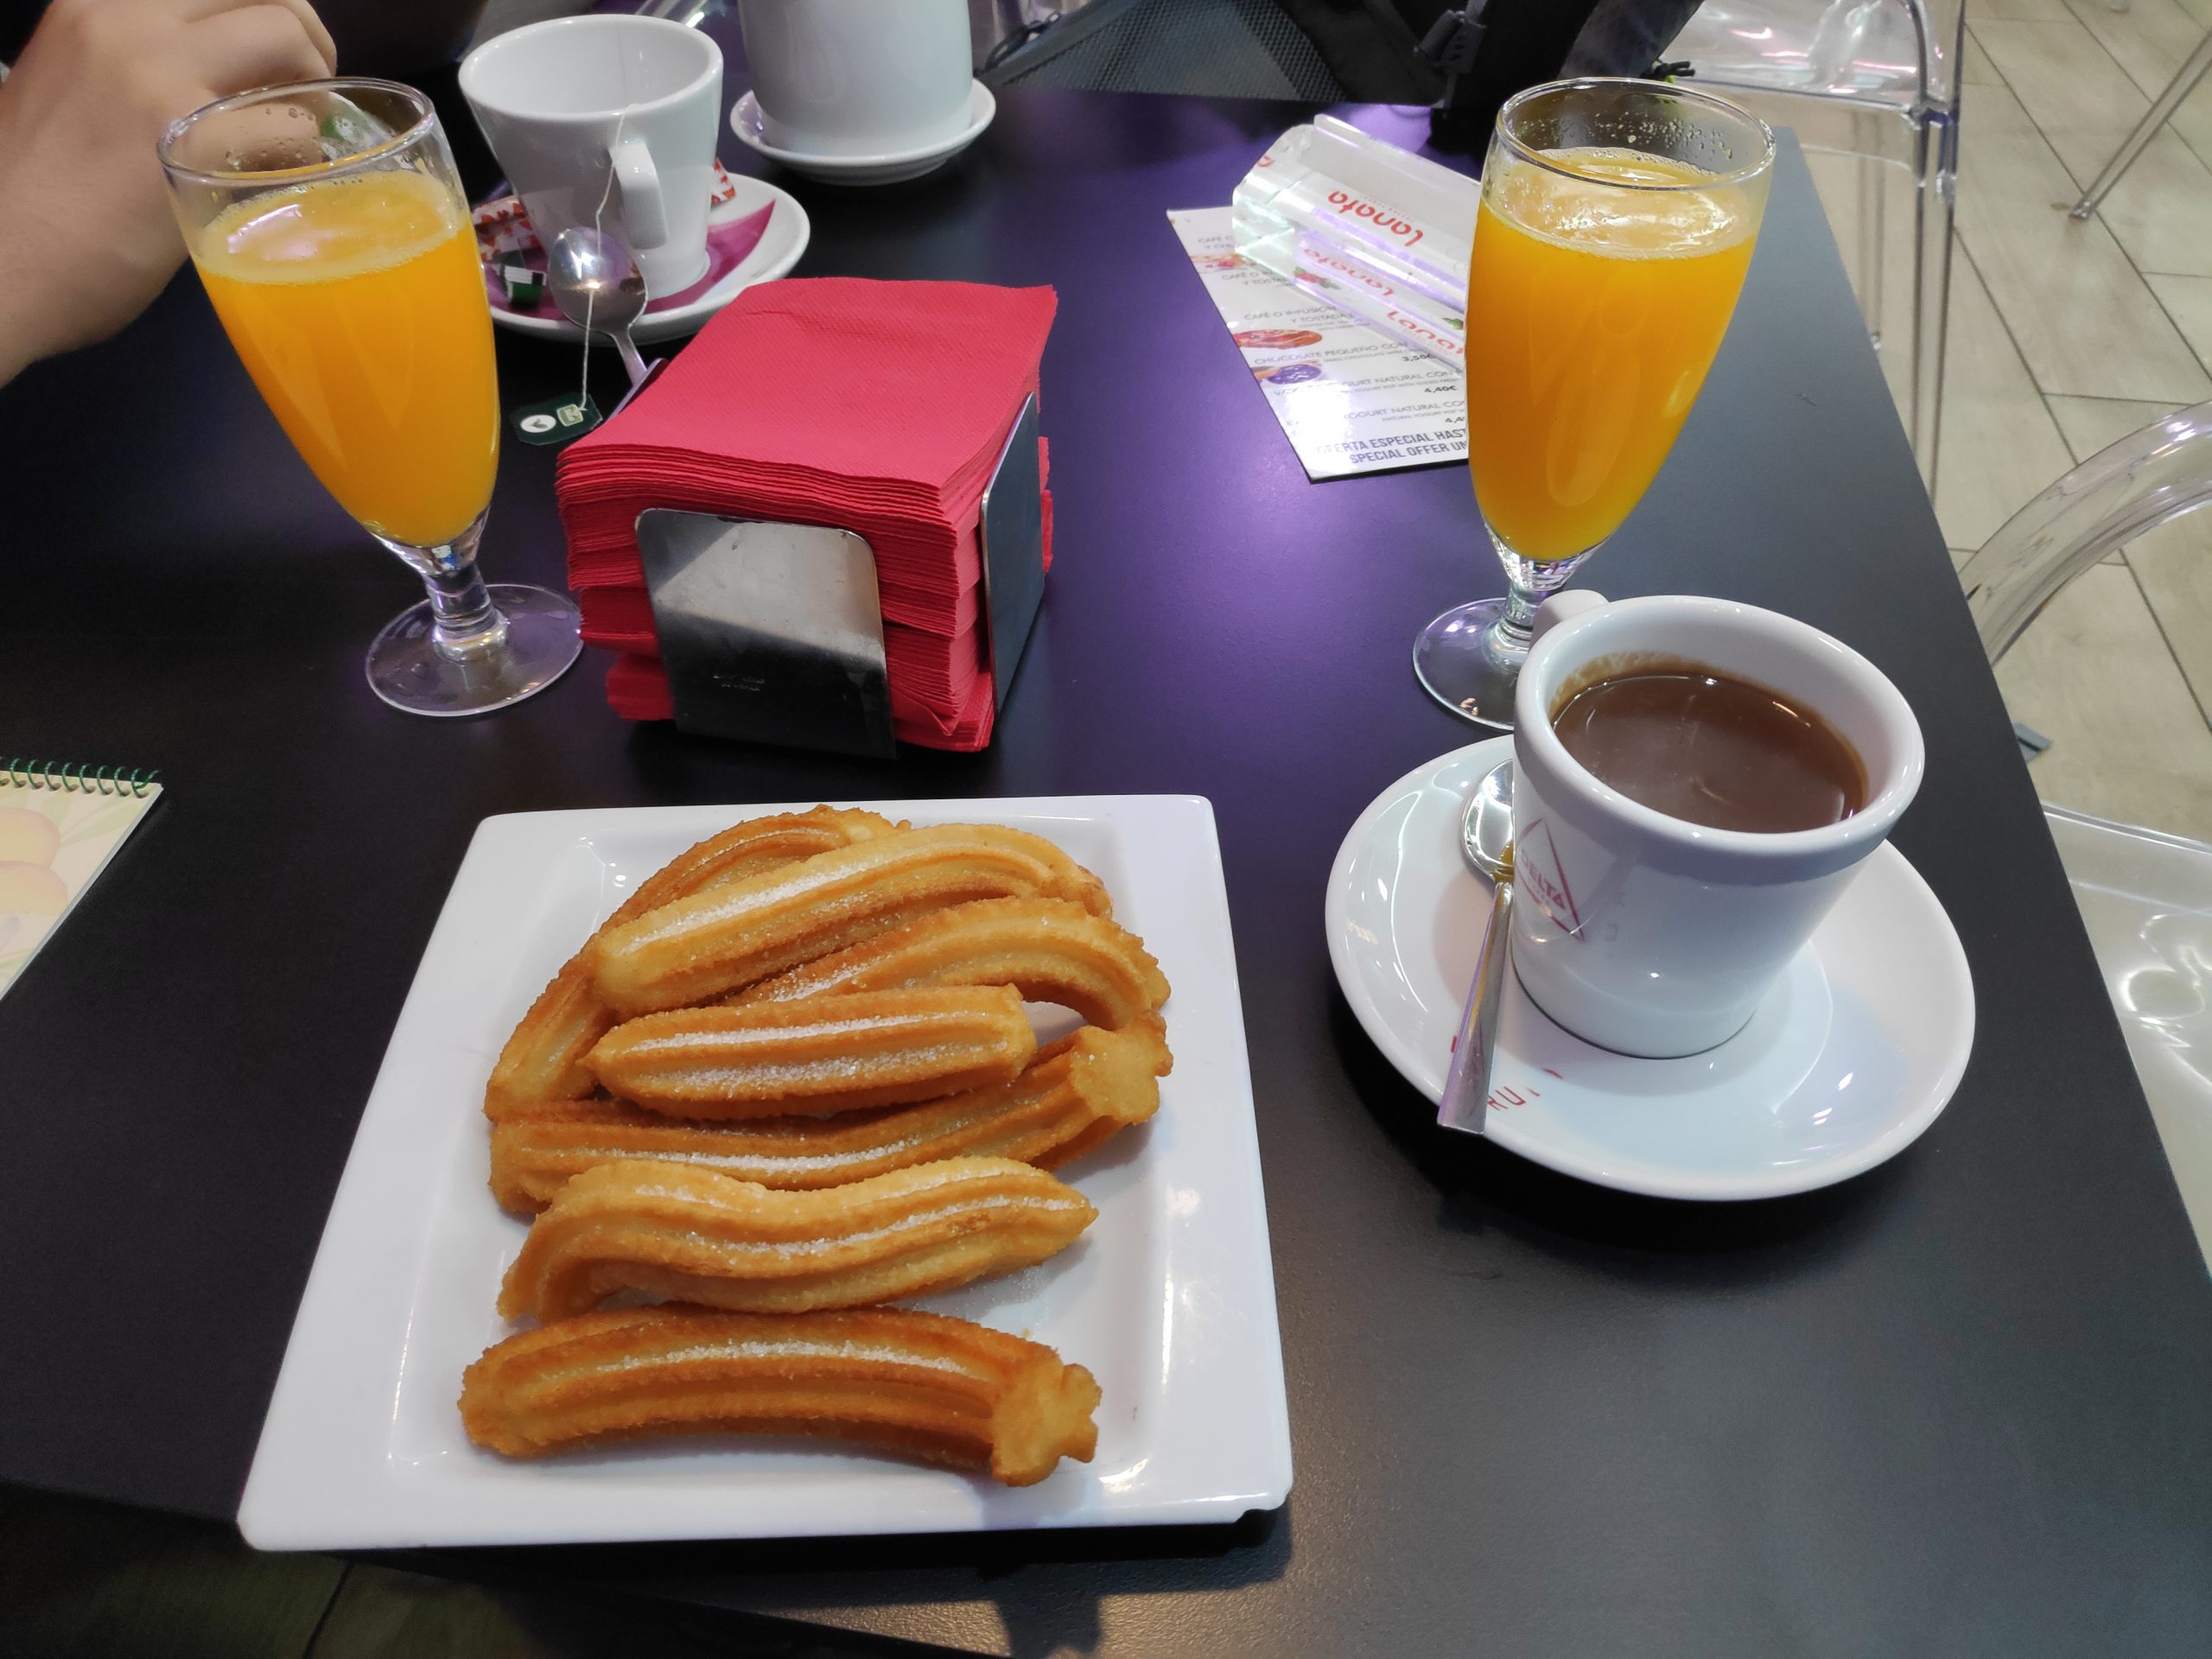 Churros and hot chocolate. Really go well in the morning, although not something I would recommend doing every morning. 